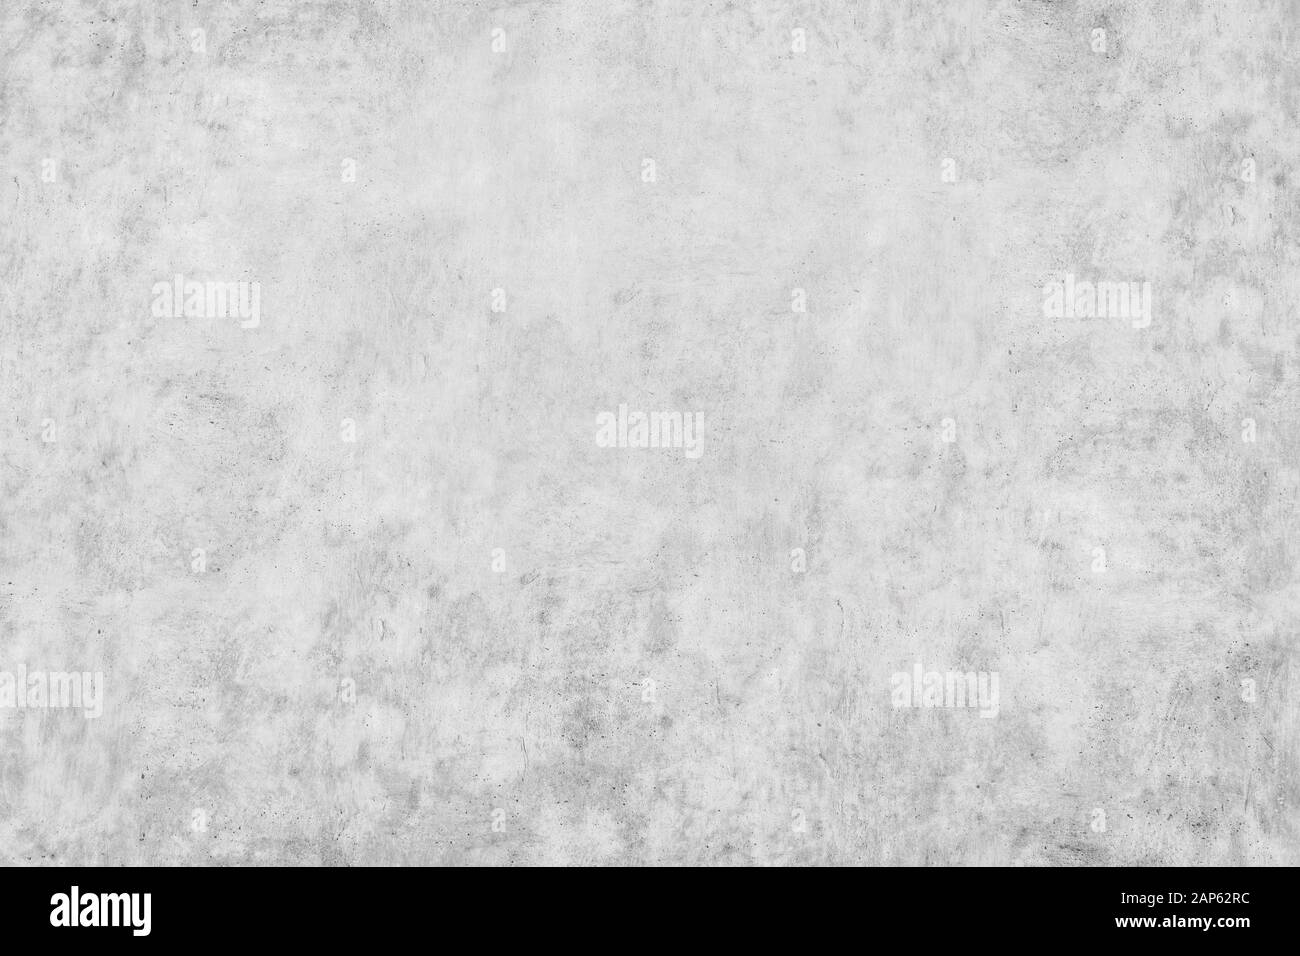 Concrete or stone wall texture for background in black, grey and white colors. Stock Photo